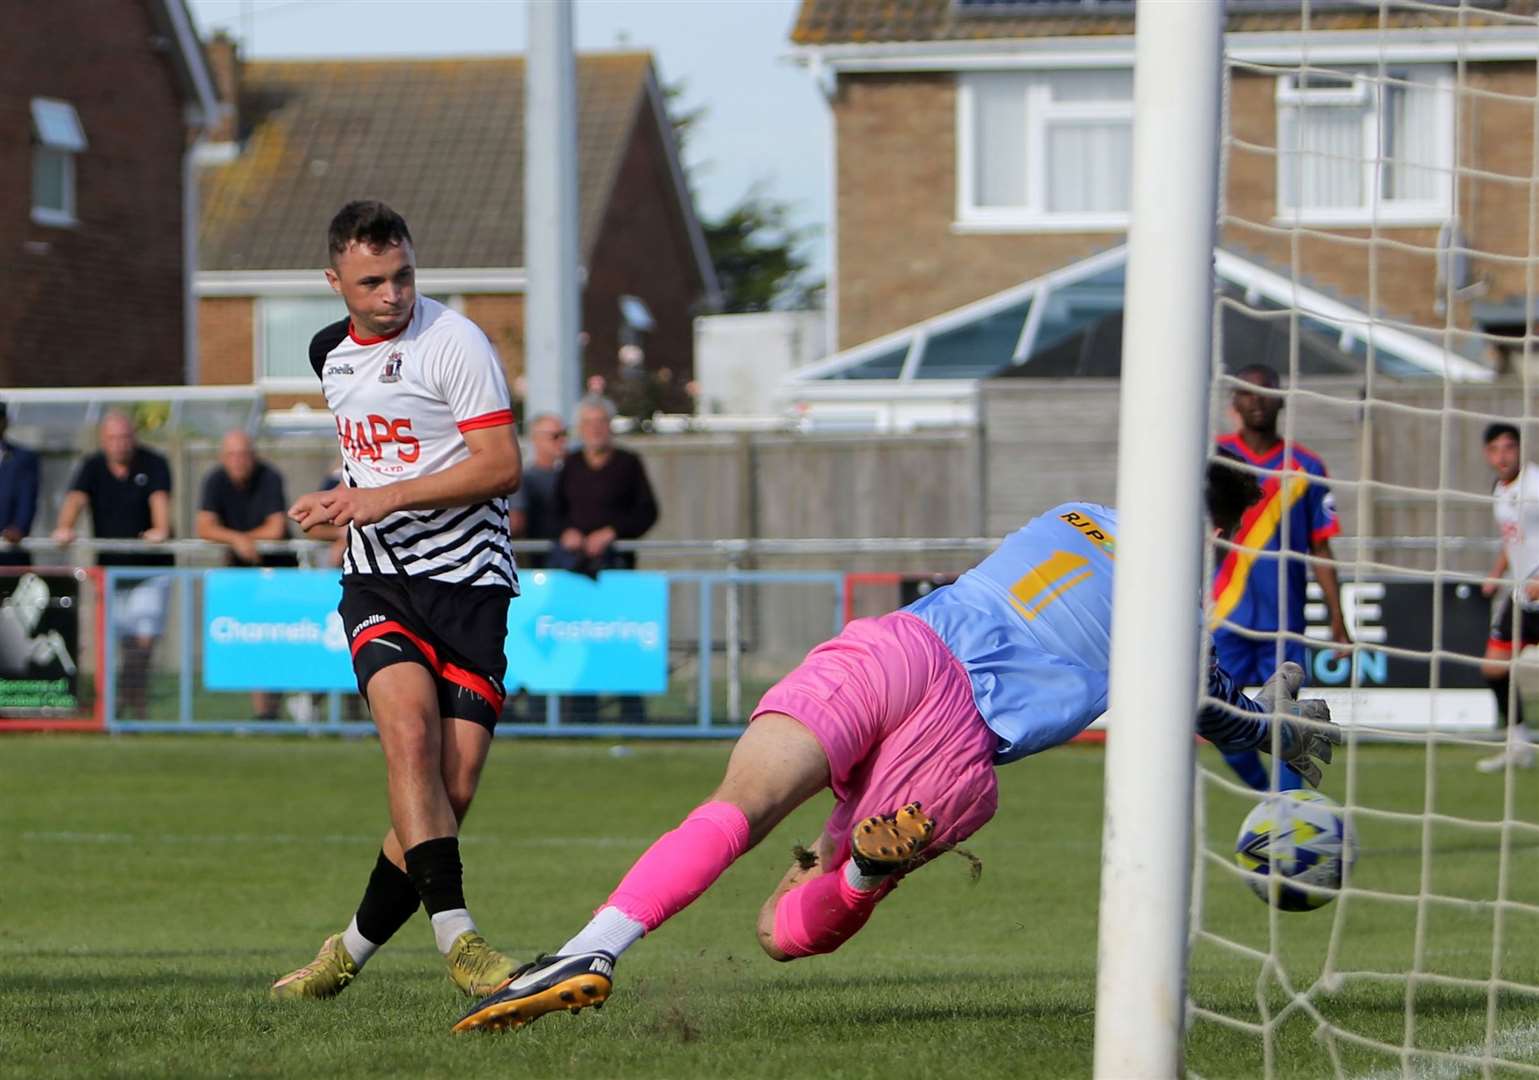 Rory Smith scored for Deal Town at Lingfield. Picture: Paul Willmott